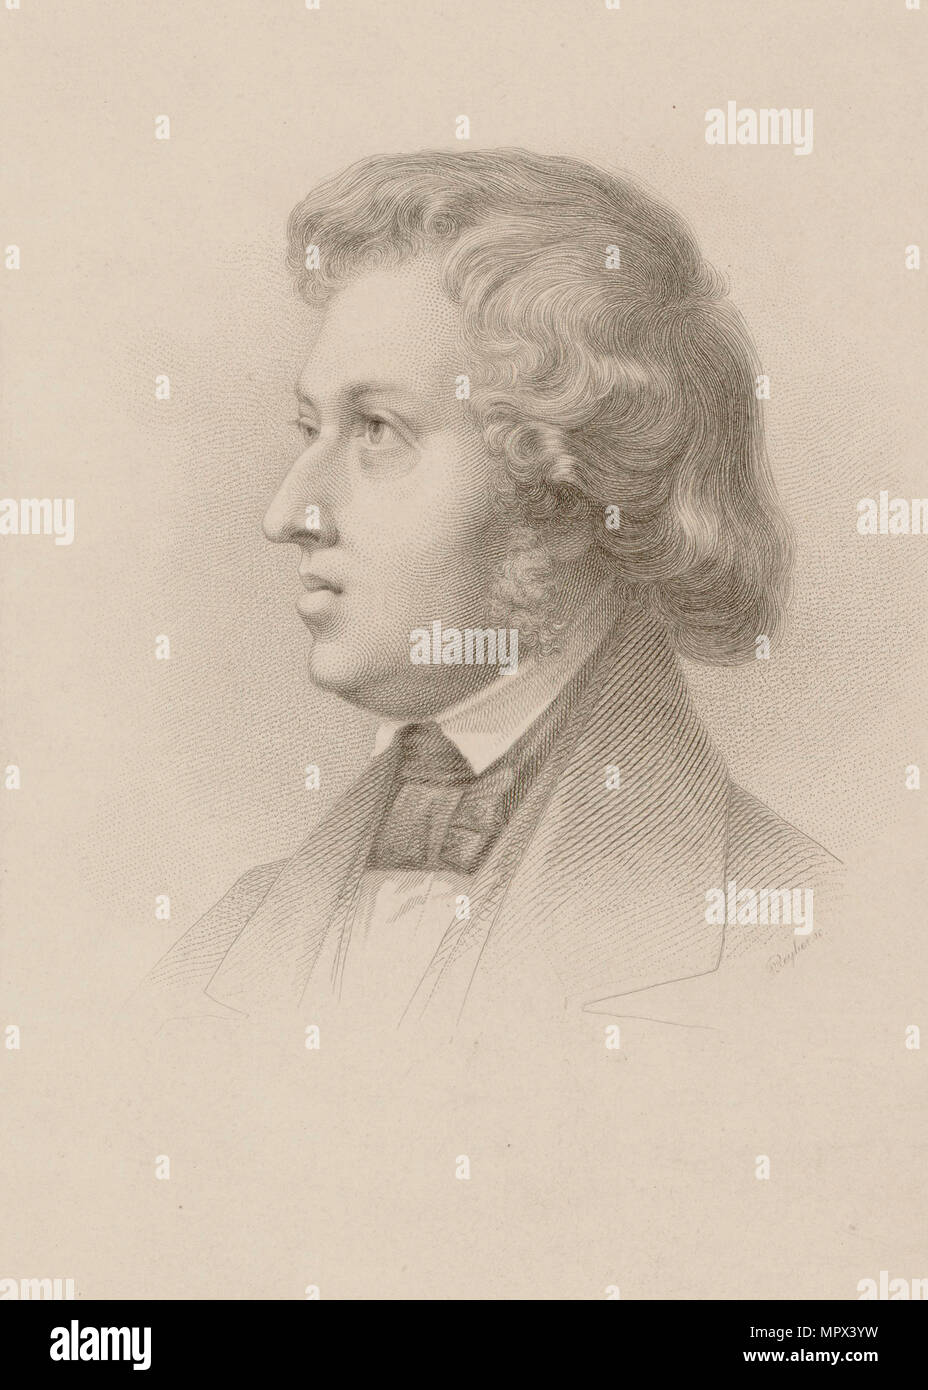 Portrait of the composer Frédéric Chopin (1810-1849), 1840s. Stock Photo